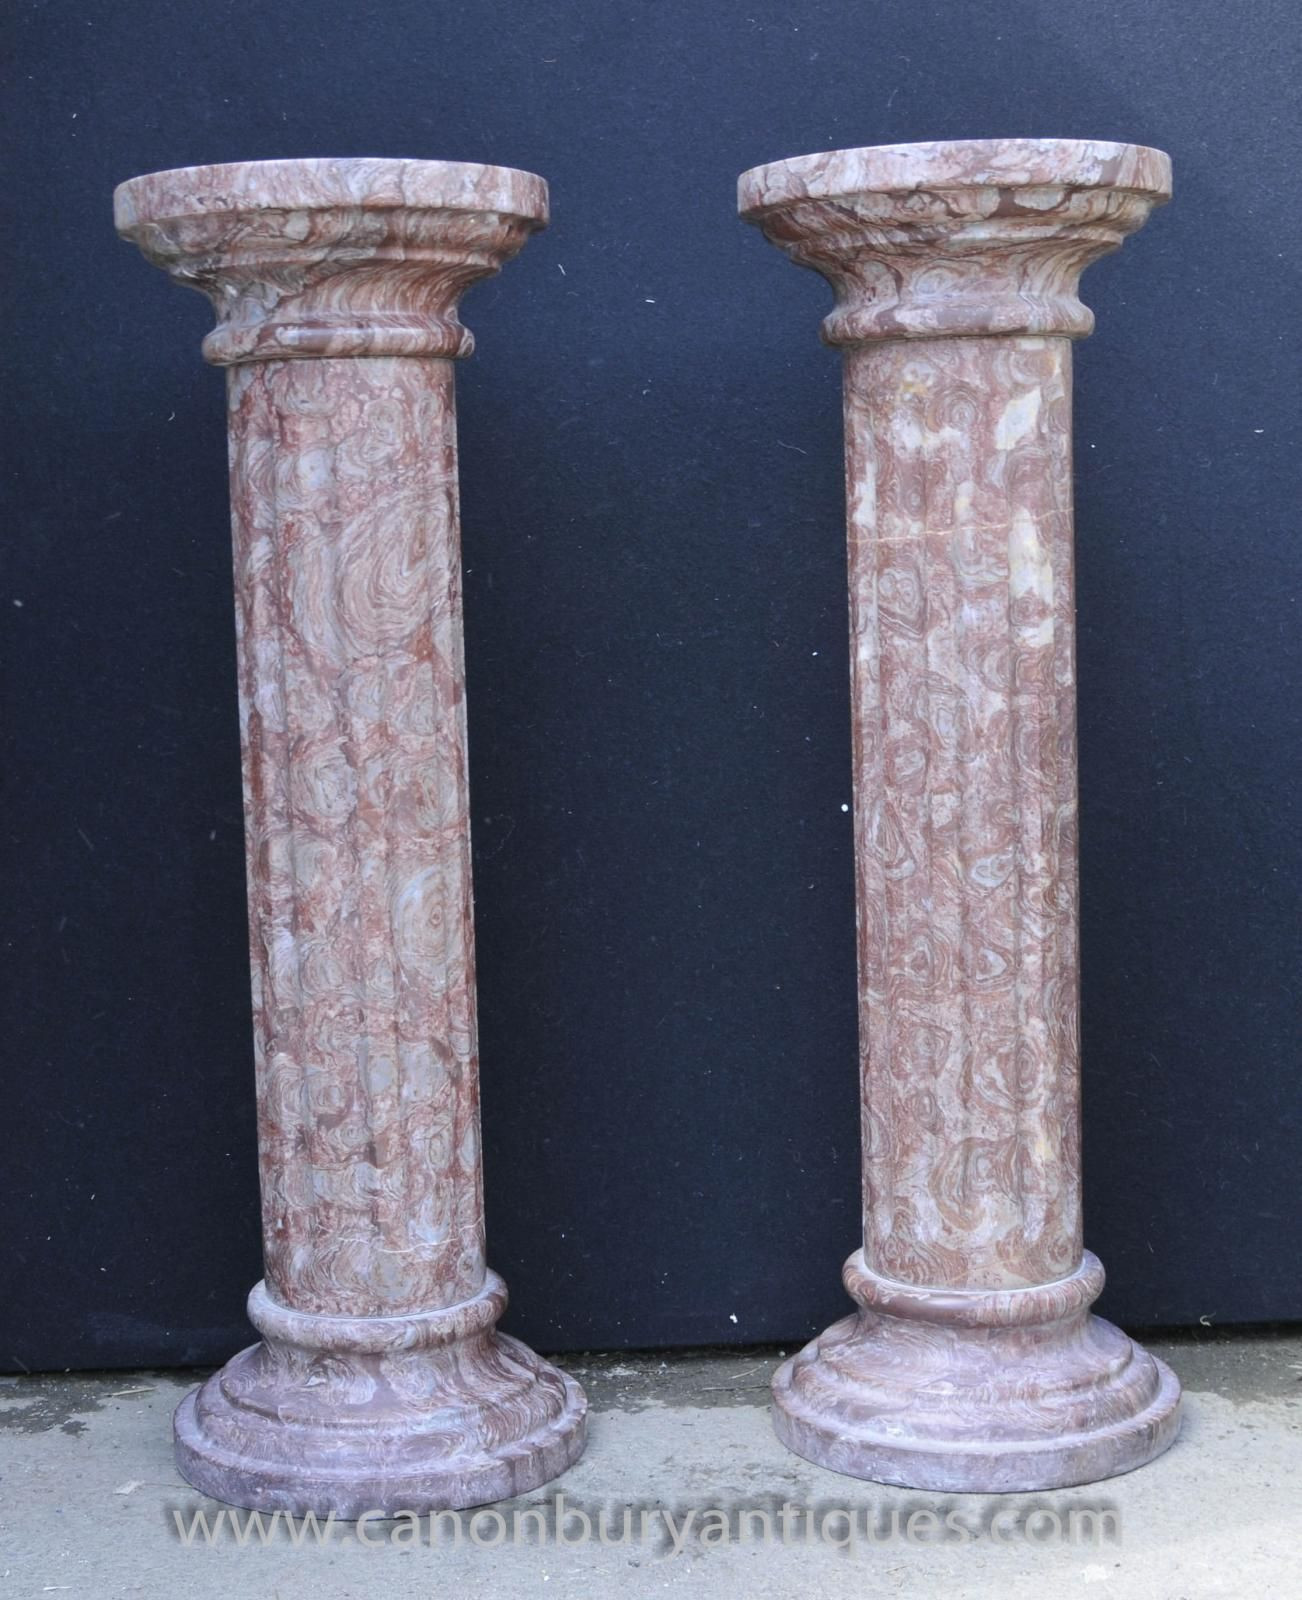 25 Awesome Pedestal Stands for Vases 2022 free download pedestal stands for vases of photo of pair classic italian marble doric column stands pedestal regarding photo of pair classic italian marble doric column stands pedestal columns